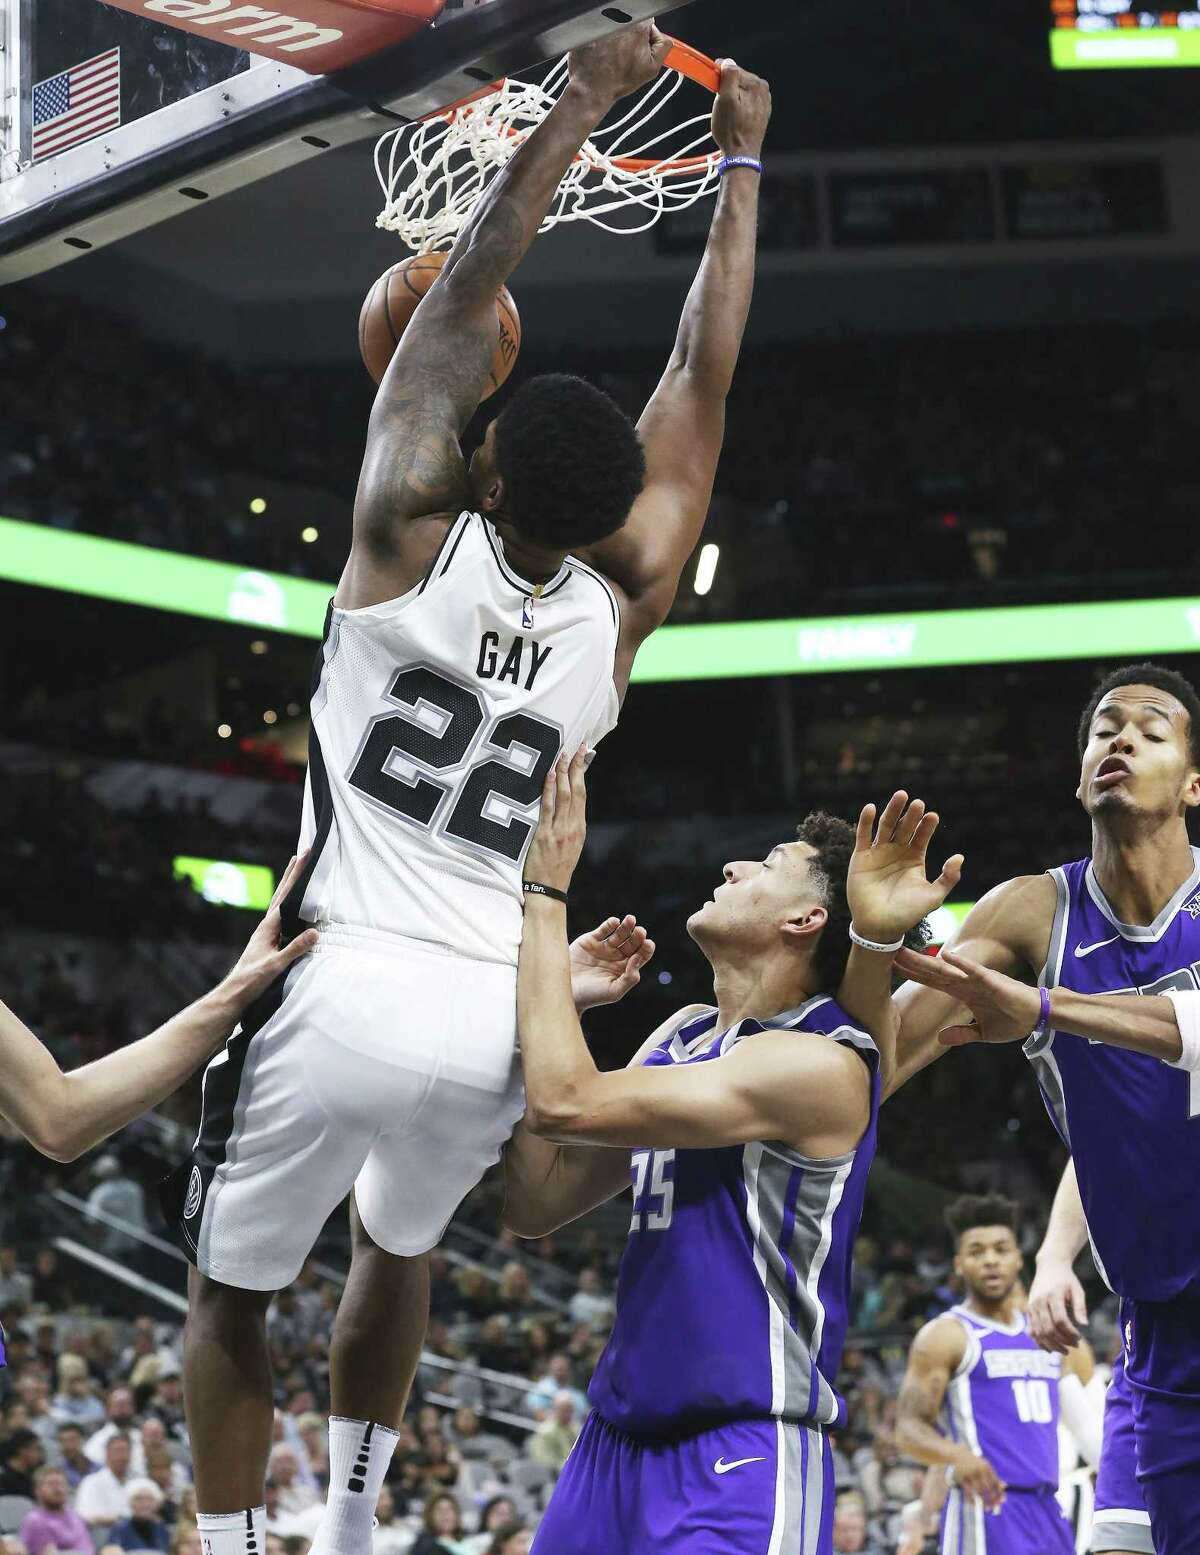 Rudy Gay leaves the defense on the floor for a dunk in the first half as the Spurs play the Kings at the AT&T Center on October 6, 2017.